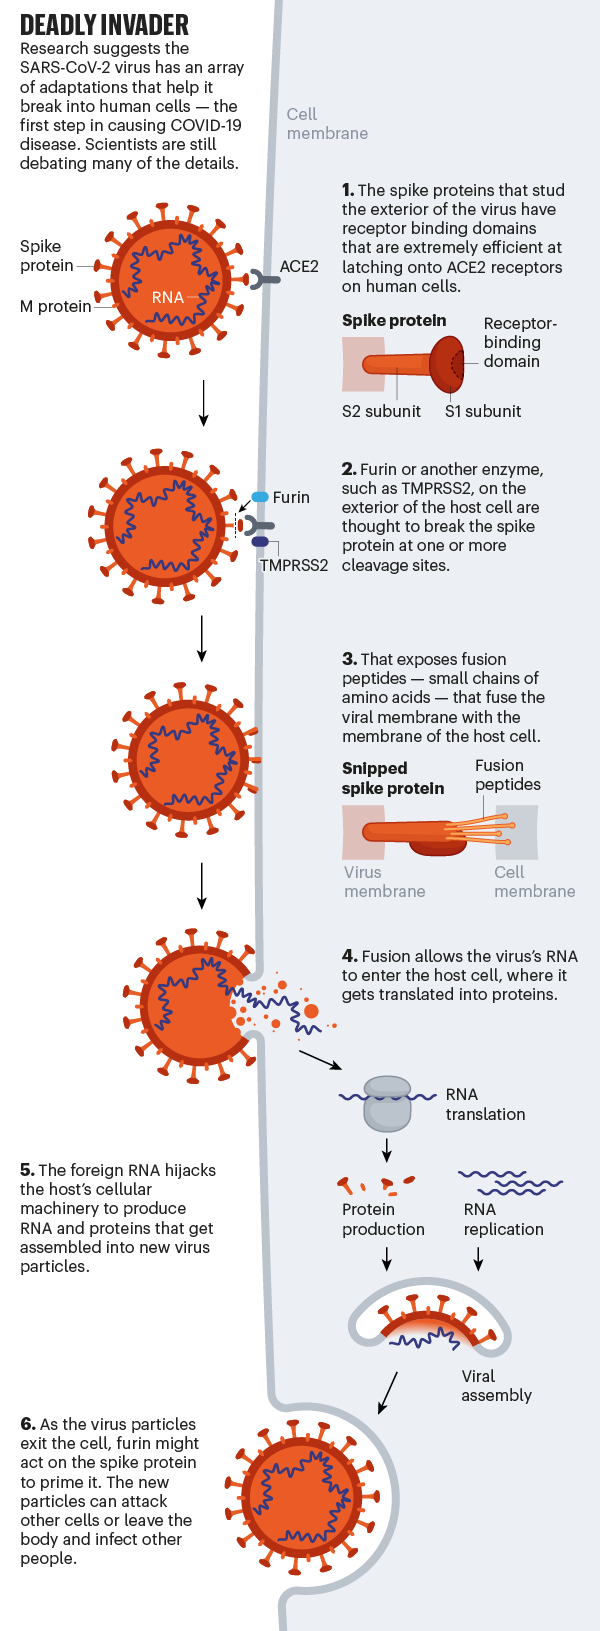 Deadly invader: Graphic showing SARS-CoV-2 infecting a human cell.